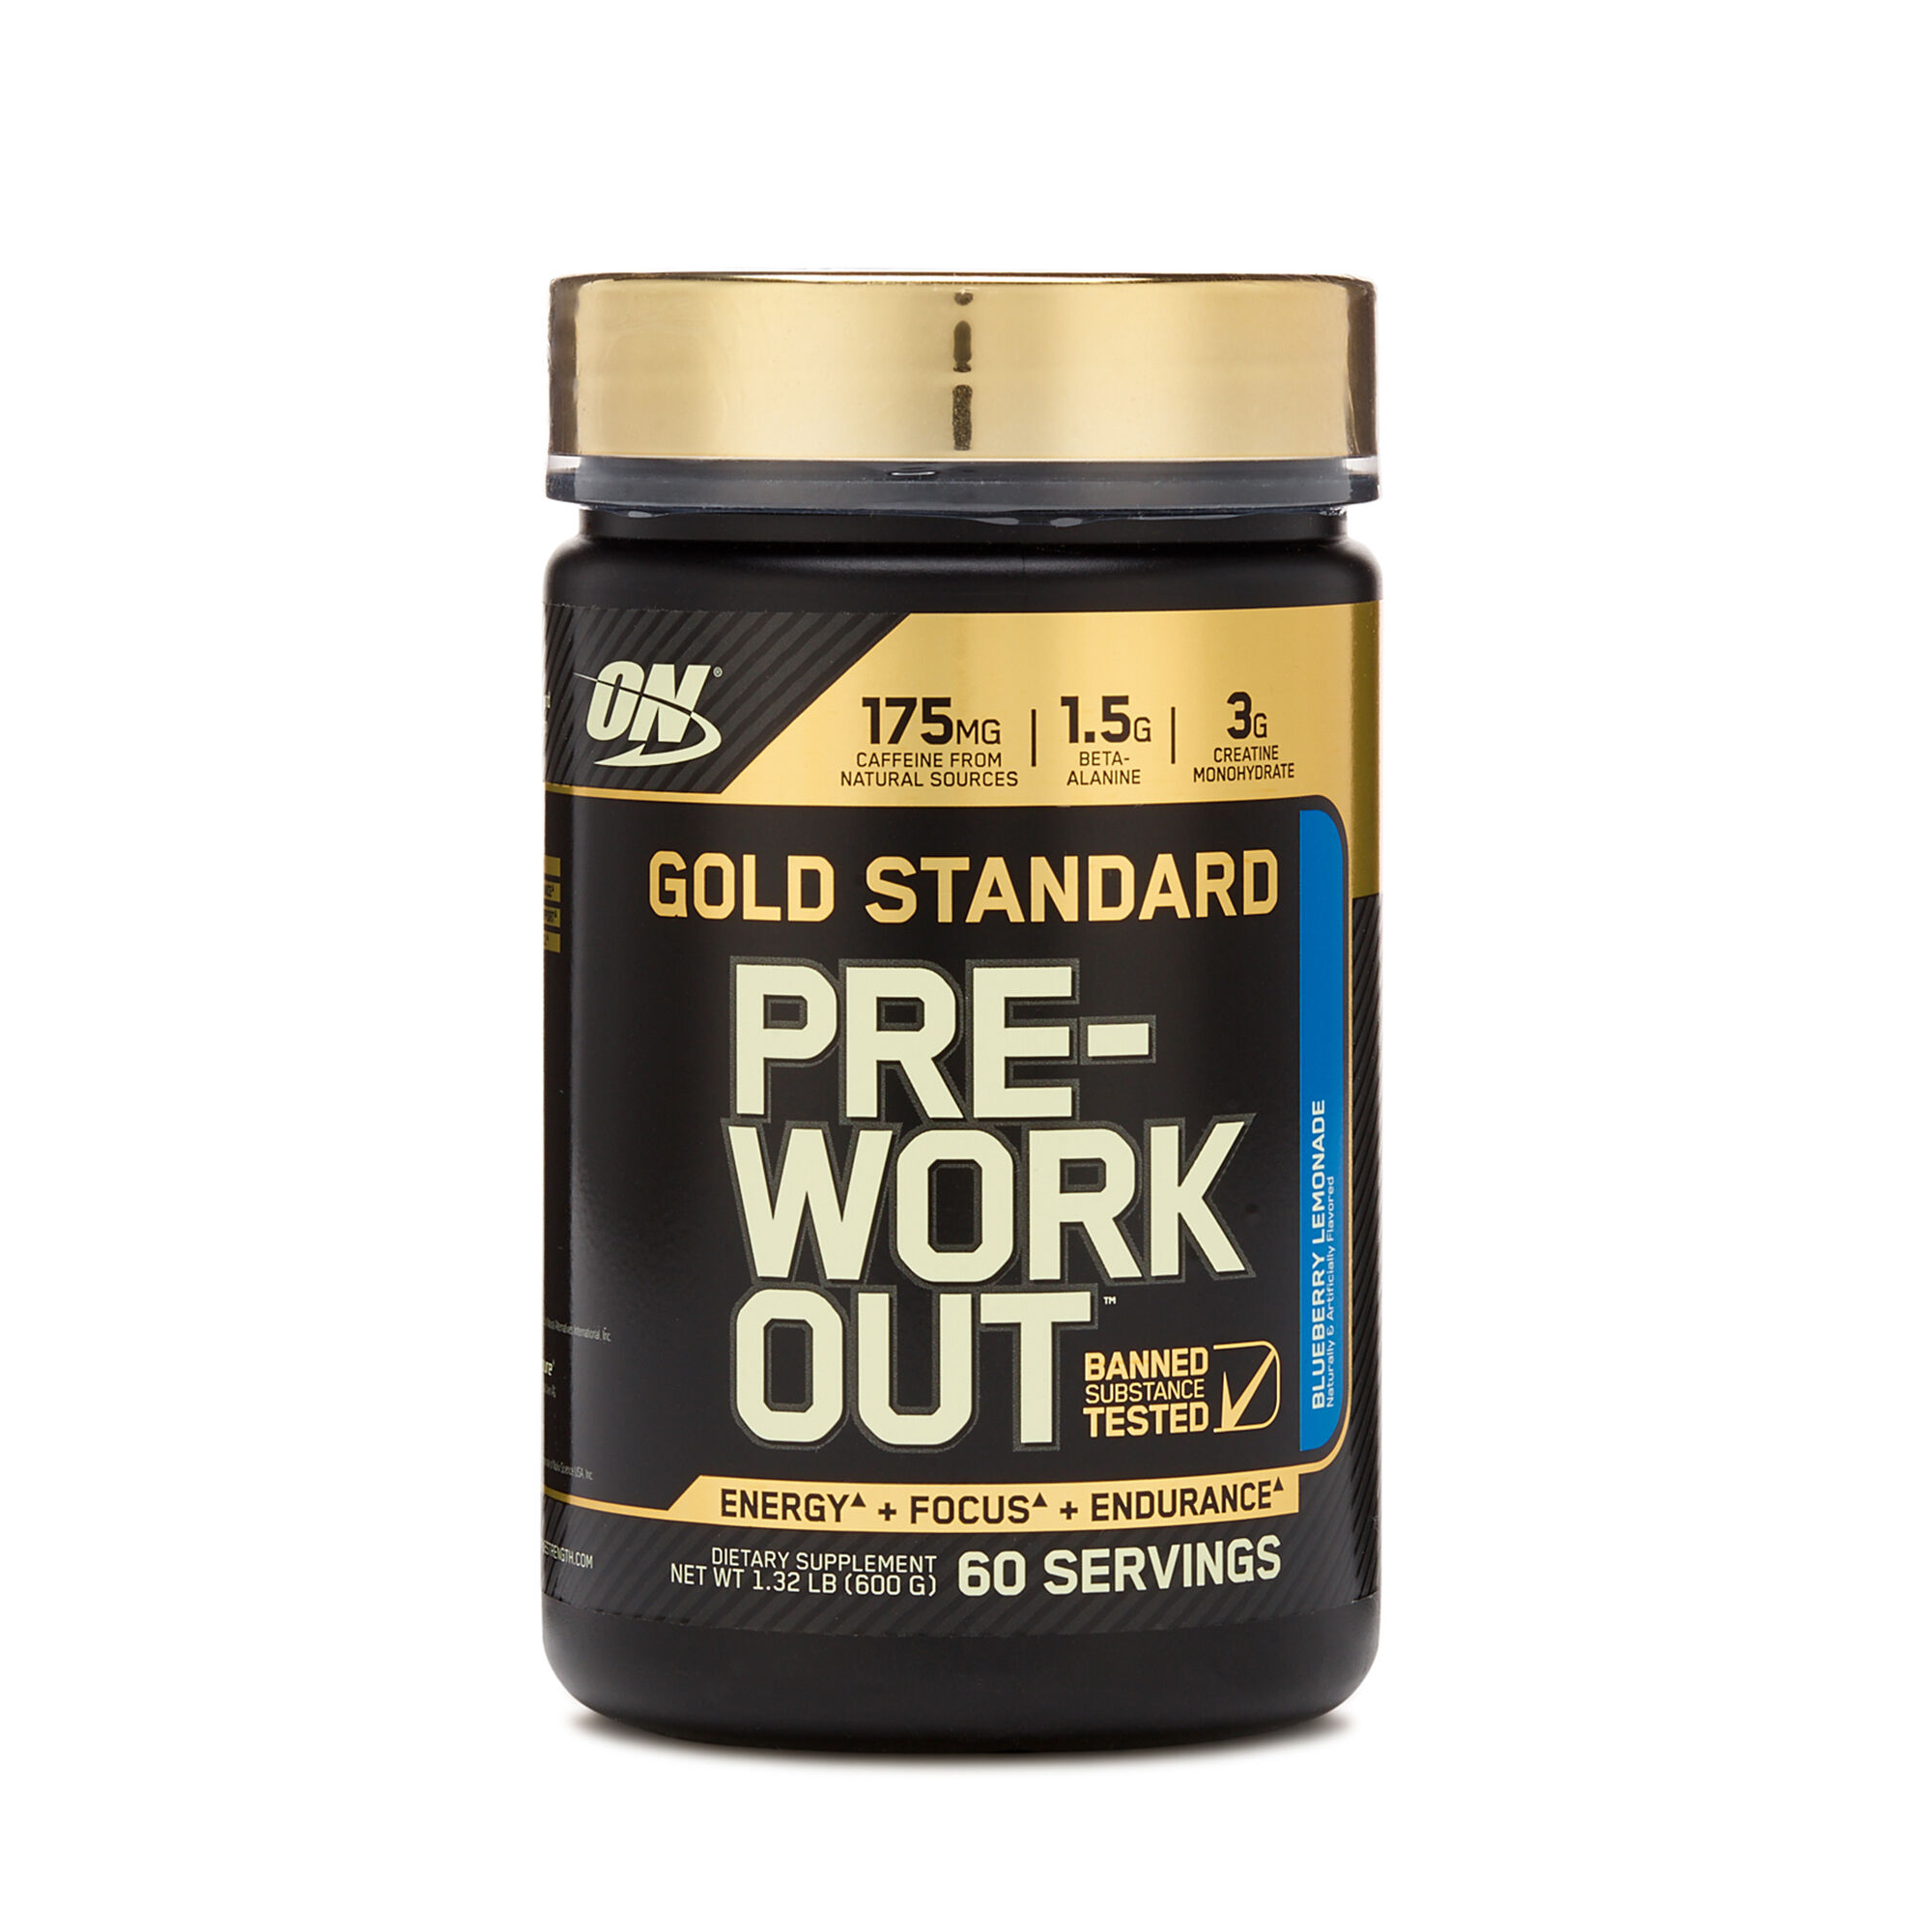 5 Day Gold standard pre workout review for Burn Fat fast